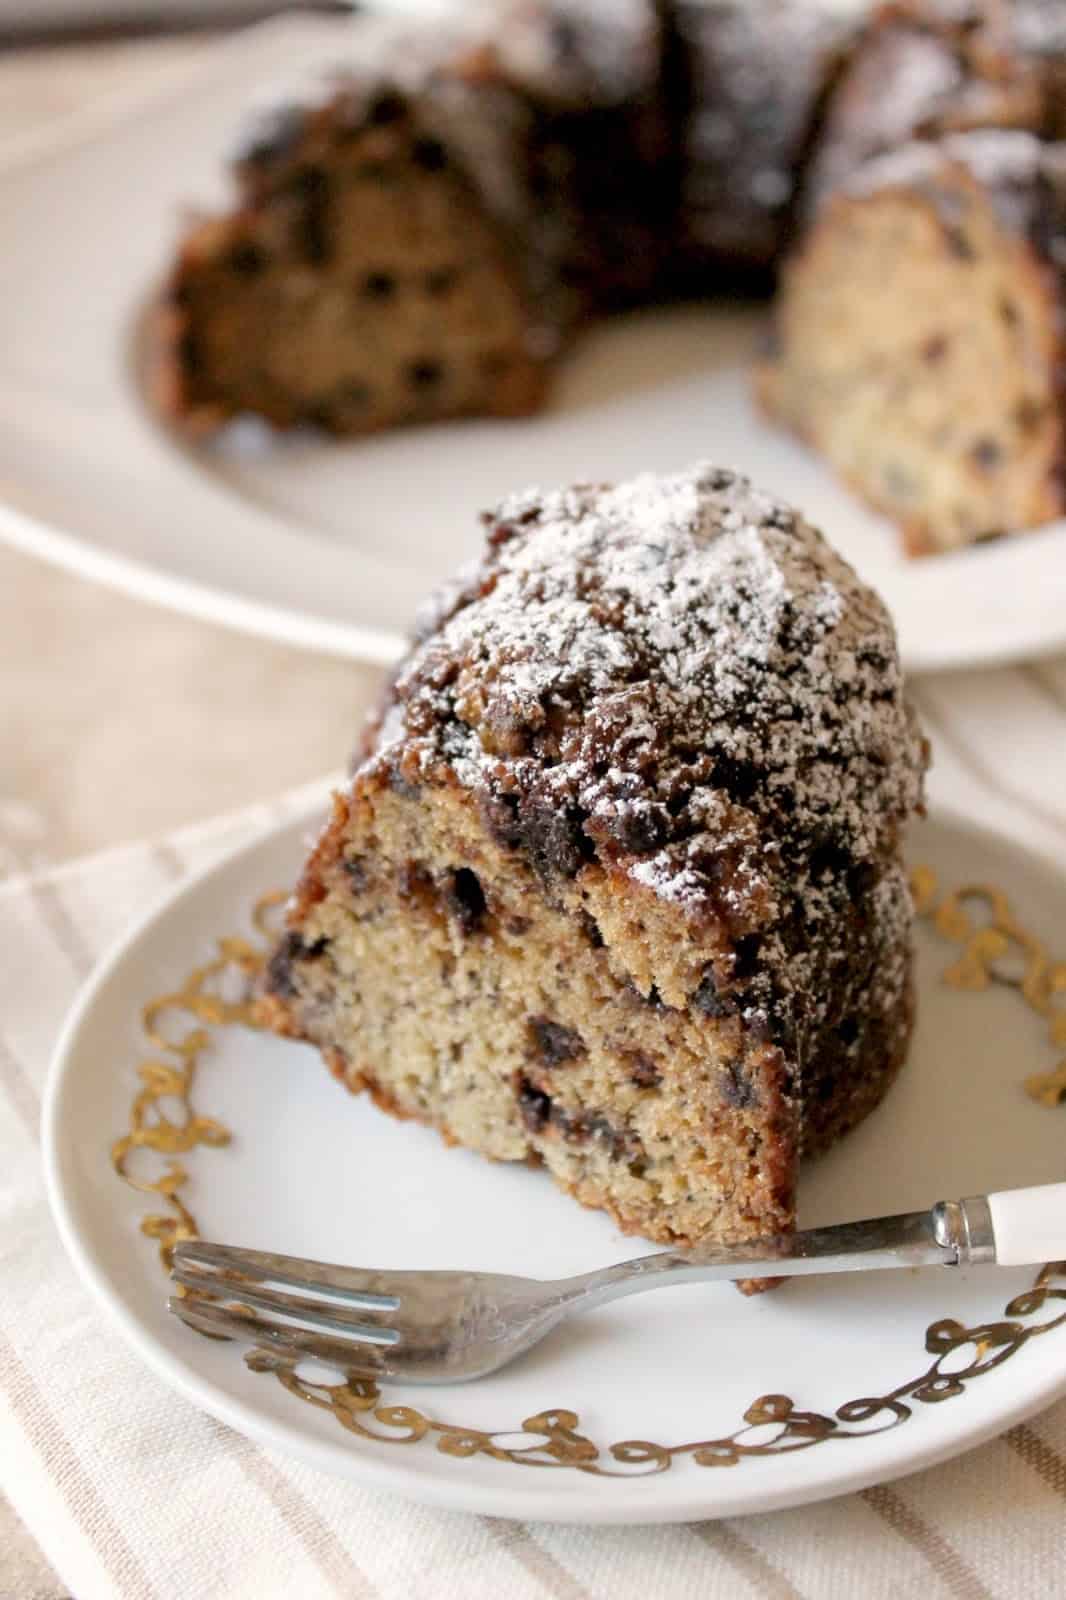 A slice of Chocolate Chip Banana Bundt Cake on a small plate with a fork.